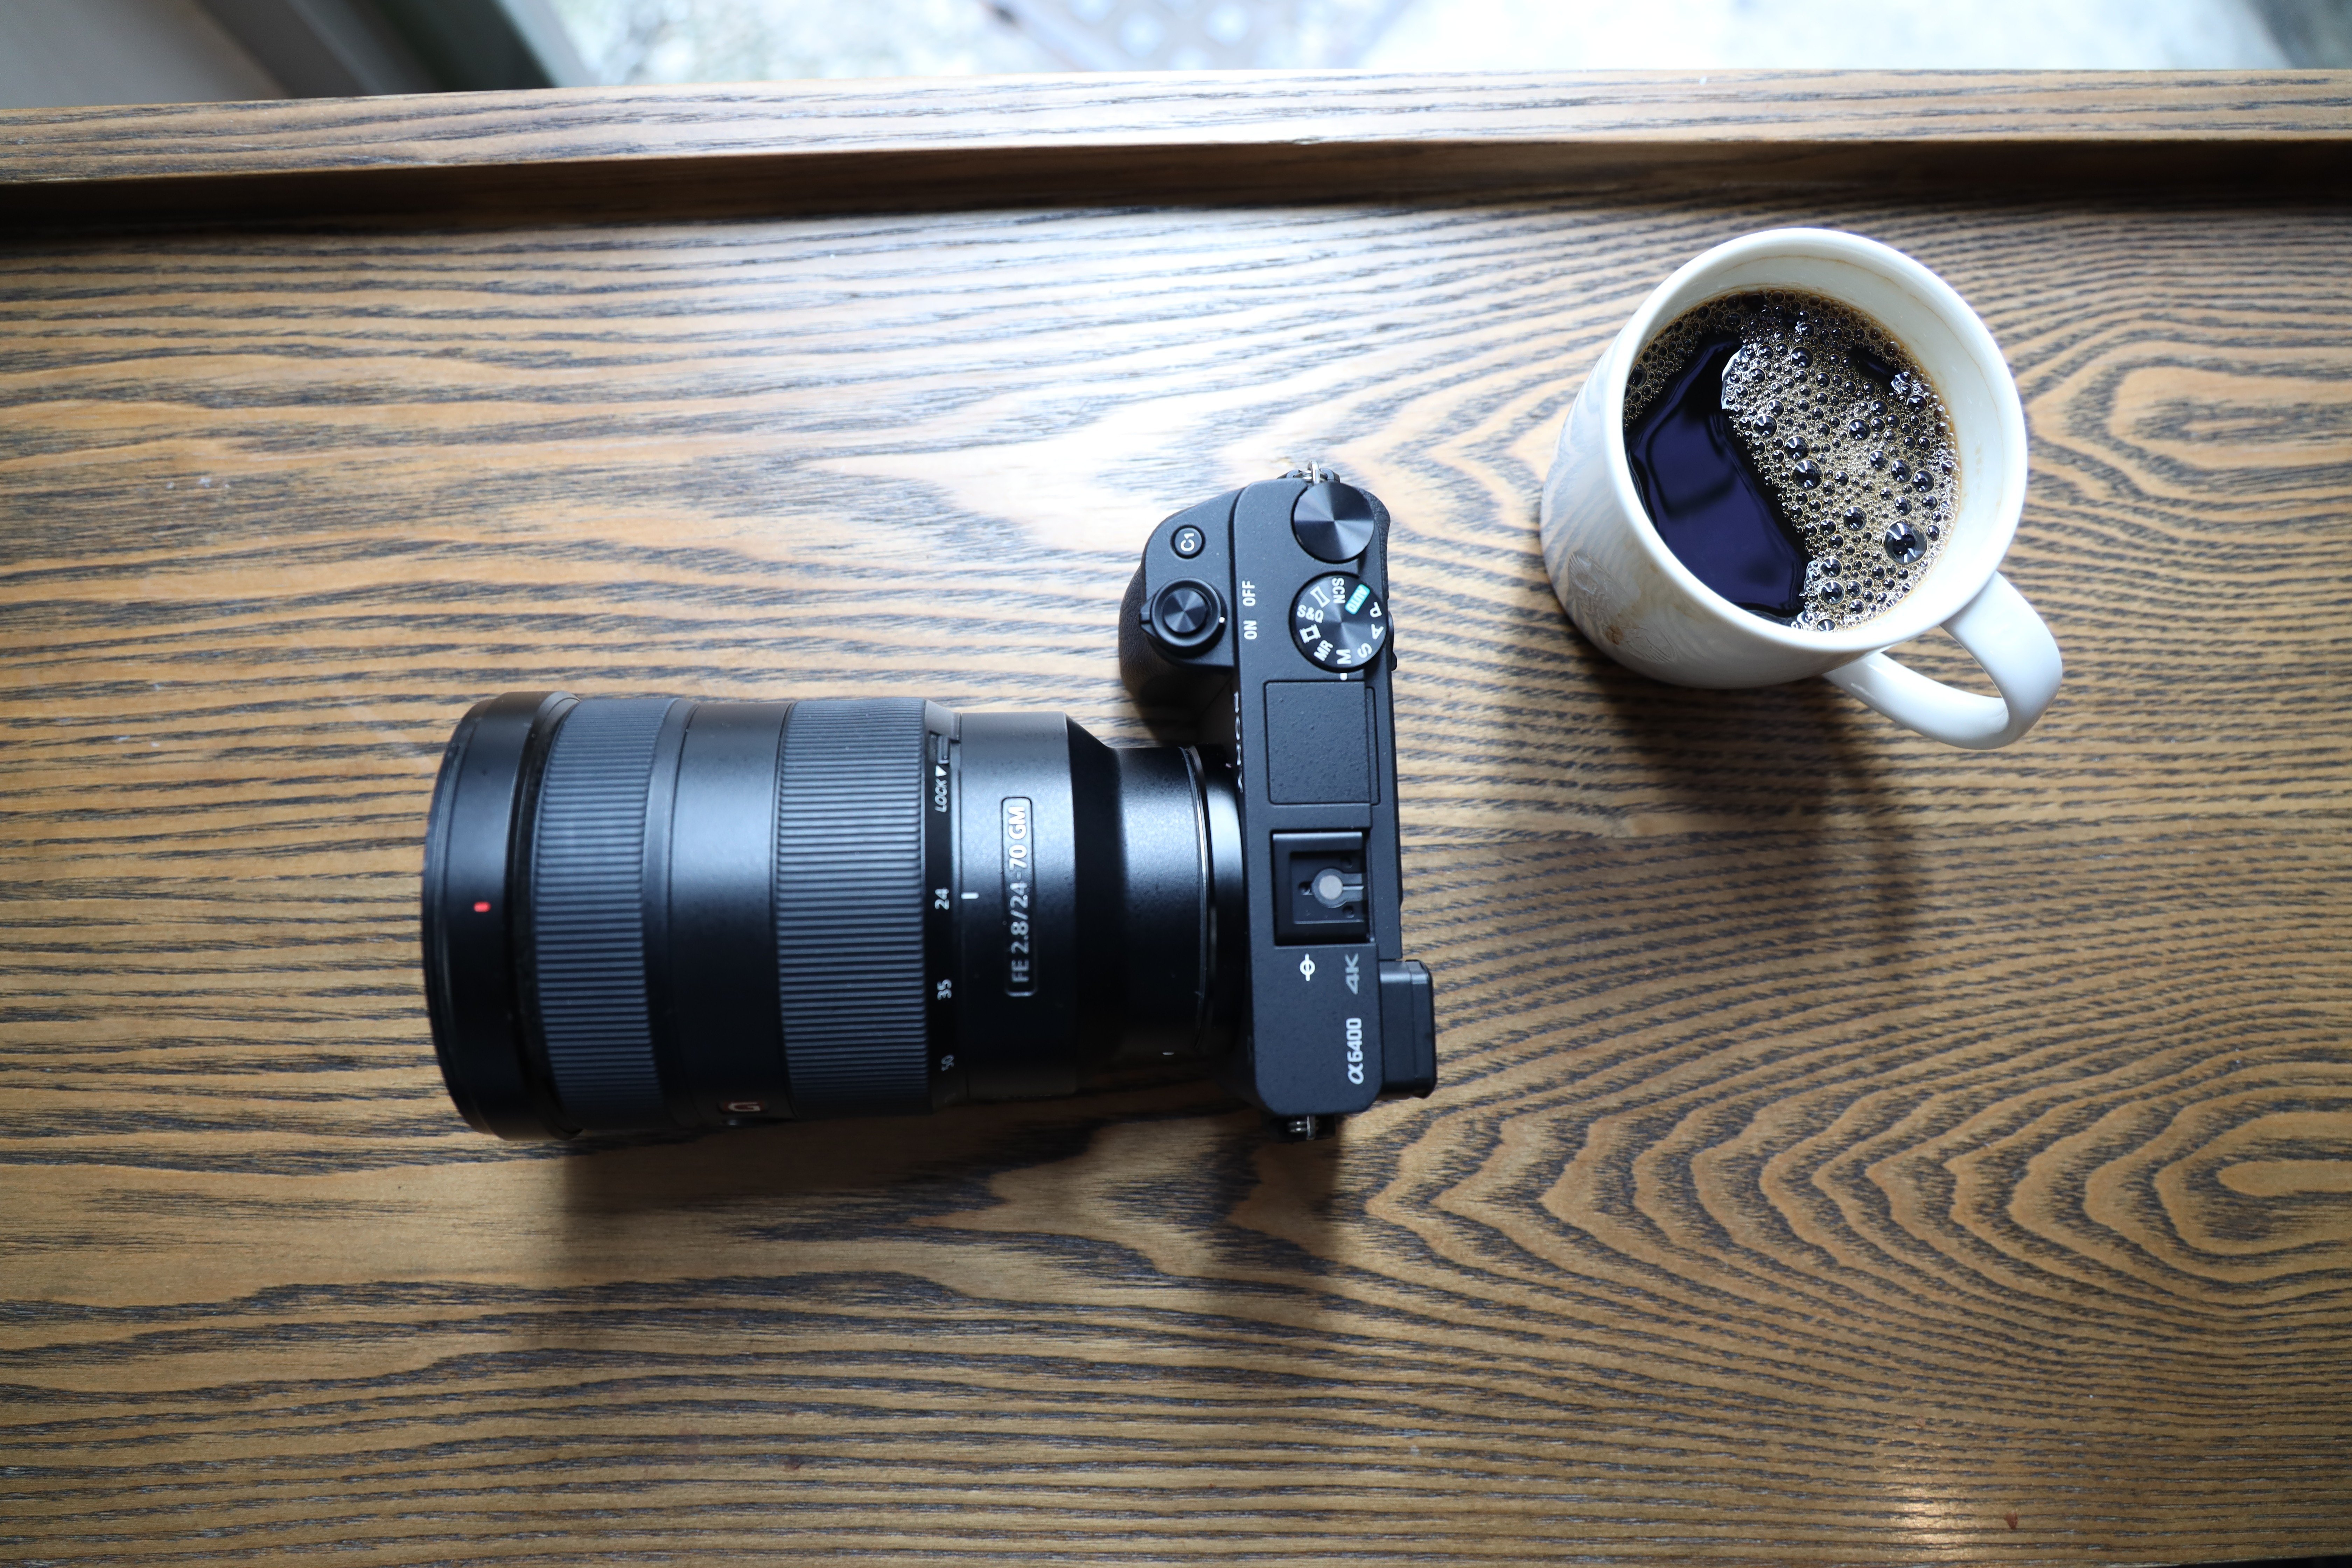 Discussing the merits of Sony’s a6400 camera is best done over a cup of coffee in a relaxed setting. Photo: Derek Ting